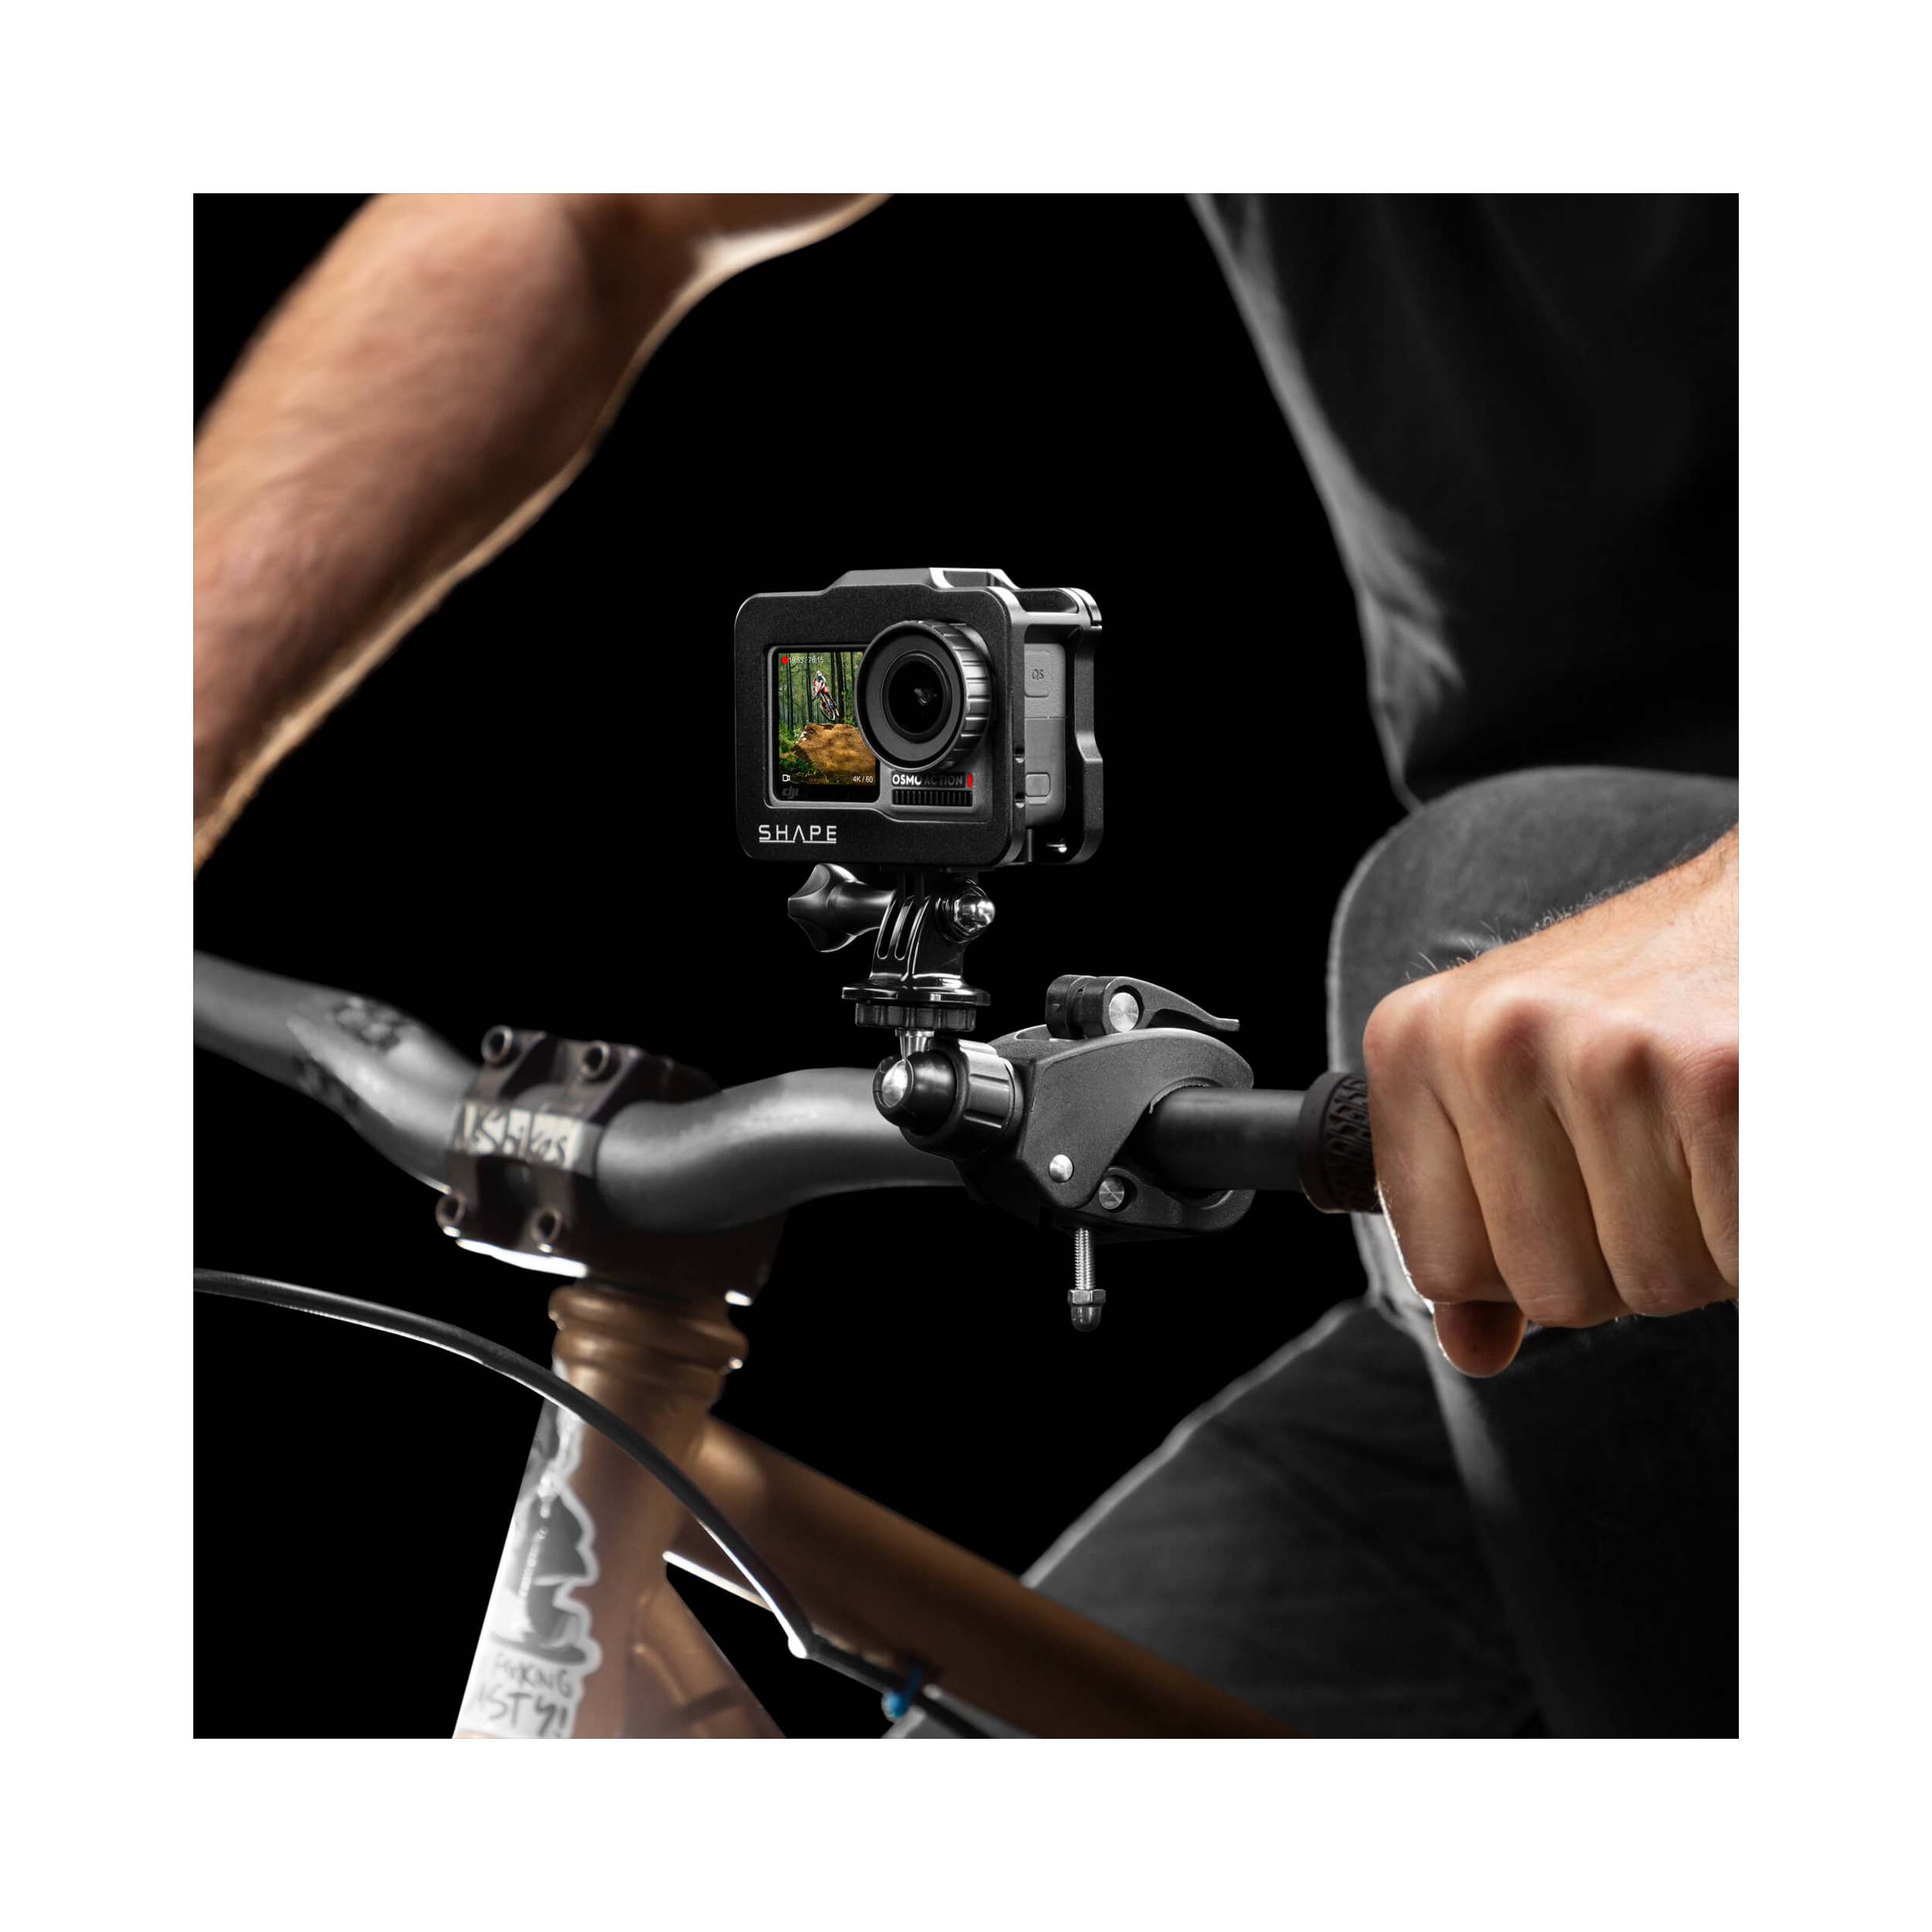 SHAPE Cage with Bike Mount Clamp for DJI Osmo Action Camera